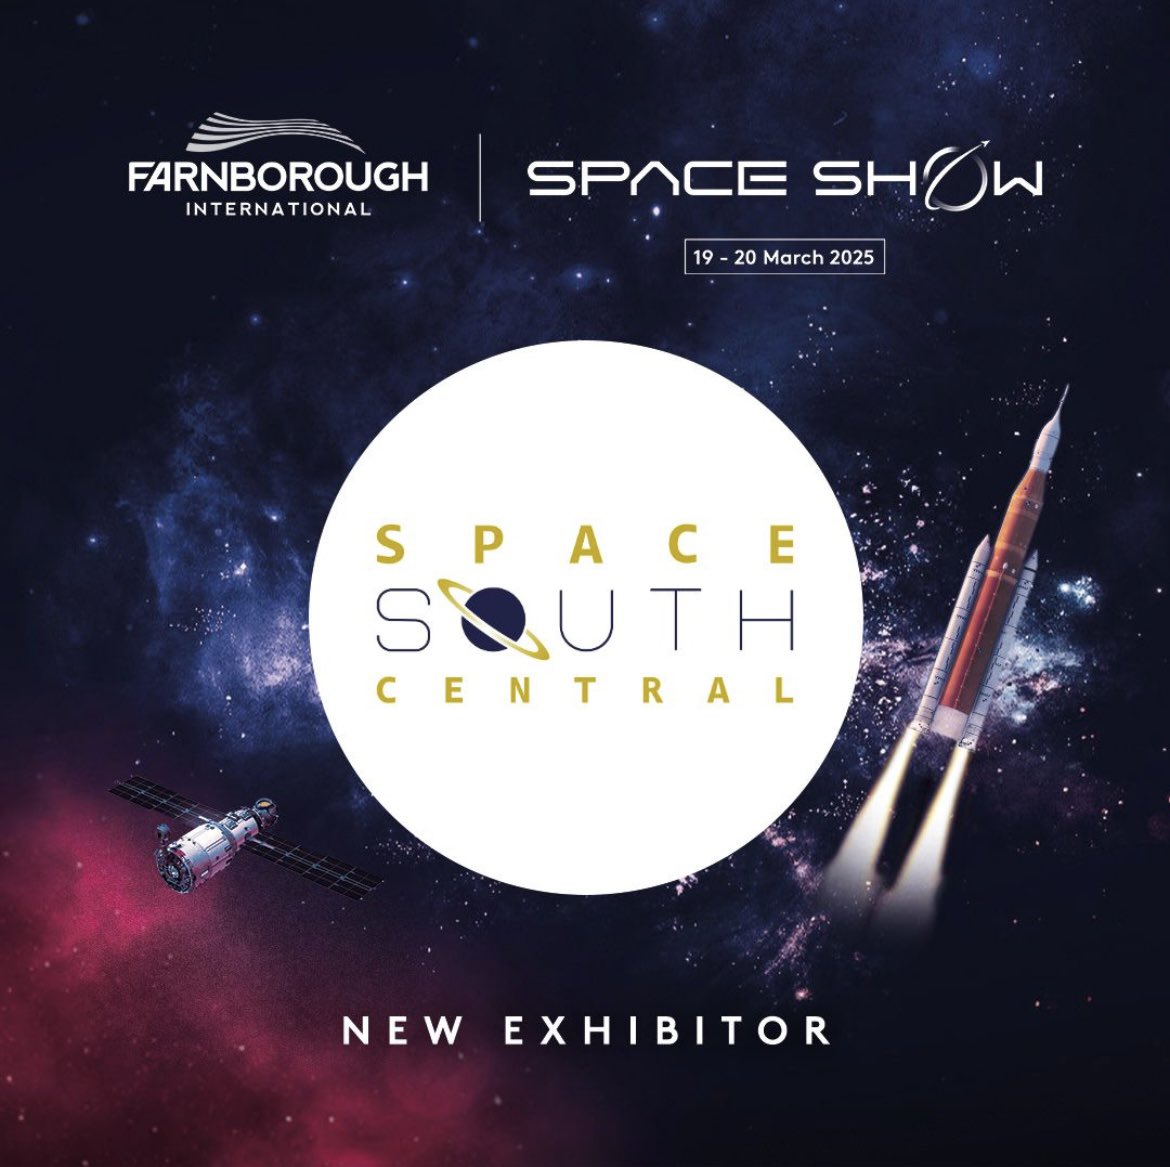 The largest regional space cluster in the UK, @spacesouthcntrl, will be joining the international space community and exhibiting at Farnborough International Space Show 2025!
 
The space cluster represents more than 175 innovative companies delivering end-to-end capabilities.